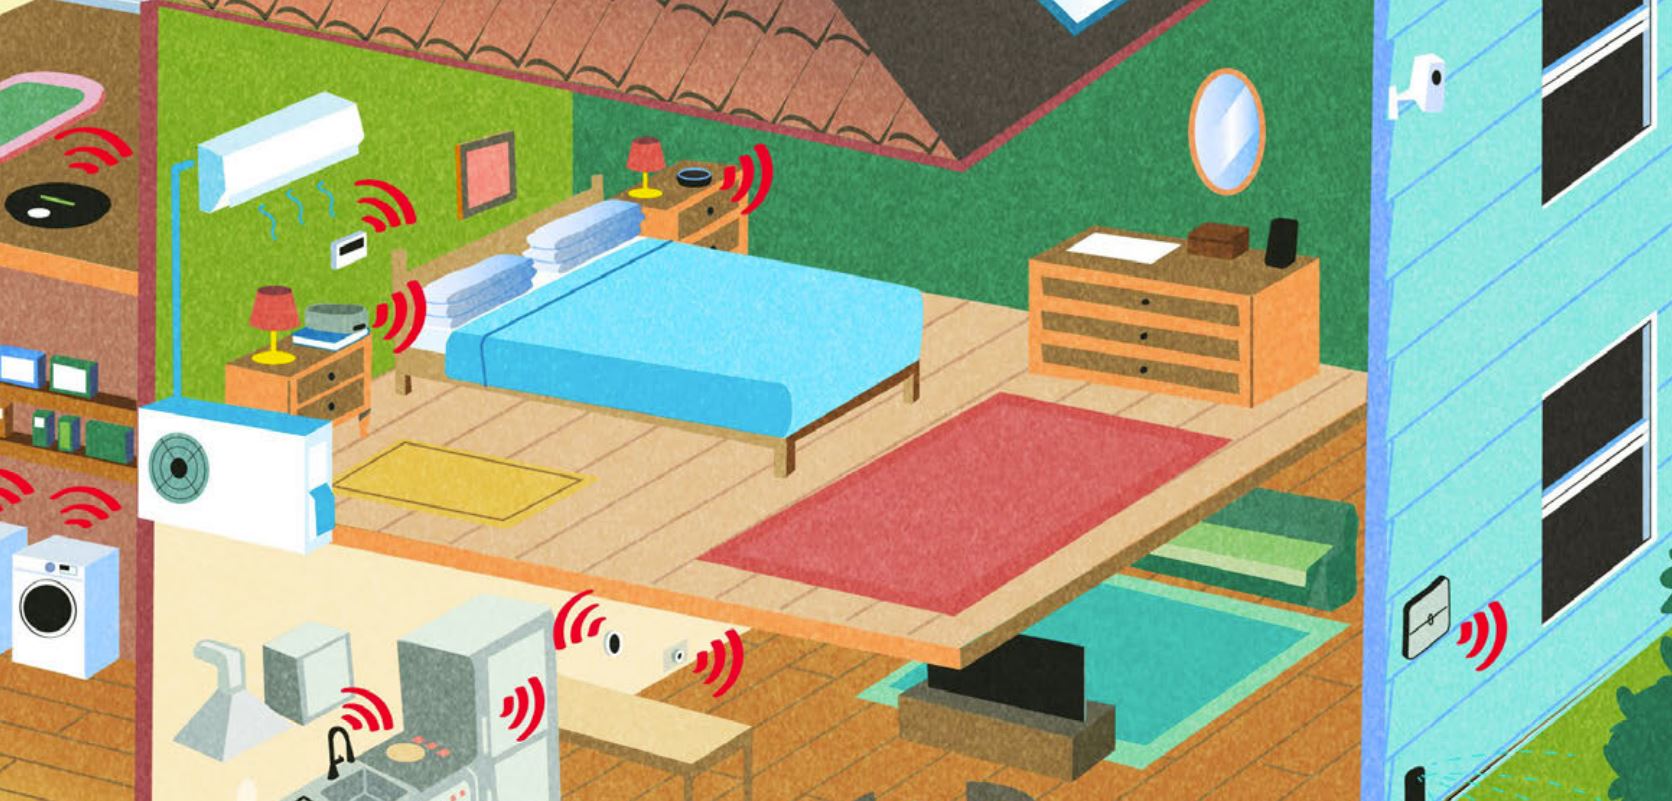 5 Smart Home Gadgets You Need in Your Apartment